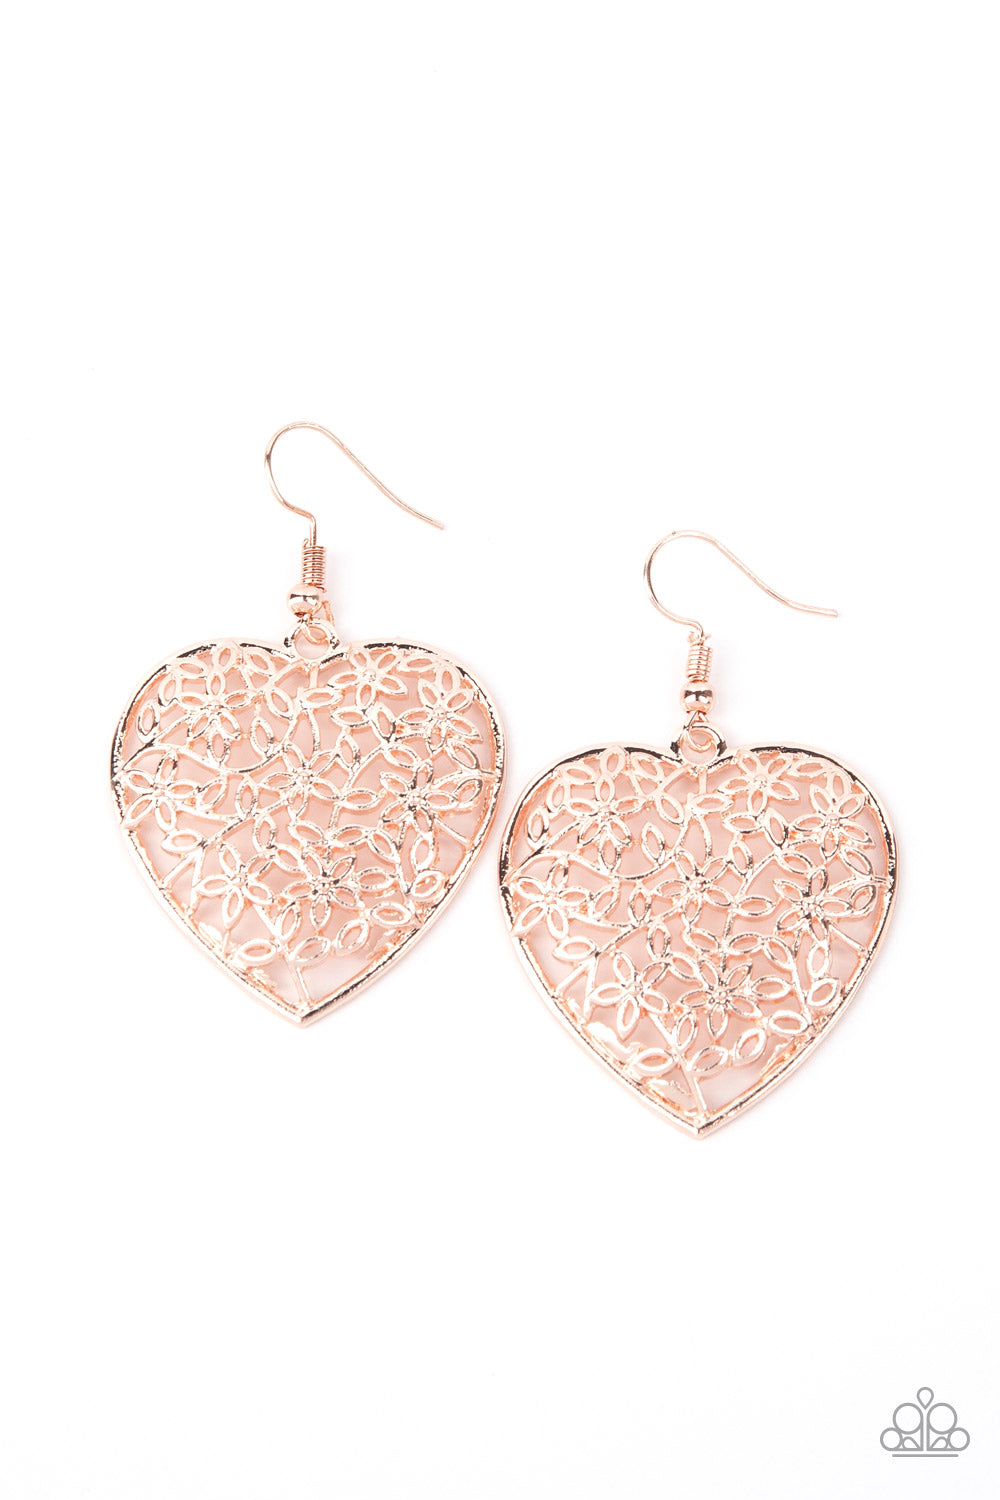 Let Your Heart Grow - rose gold - Paparazzi earrings